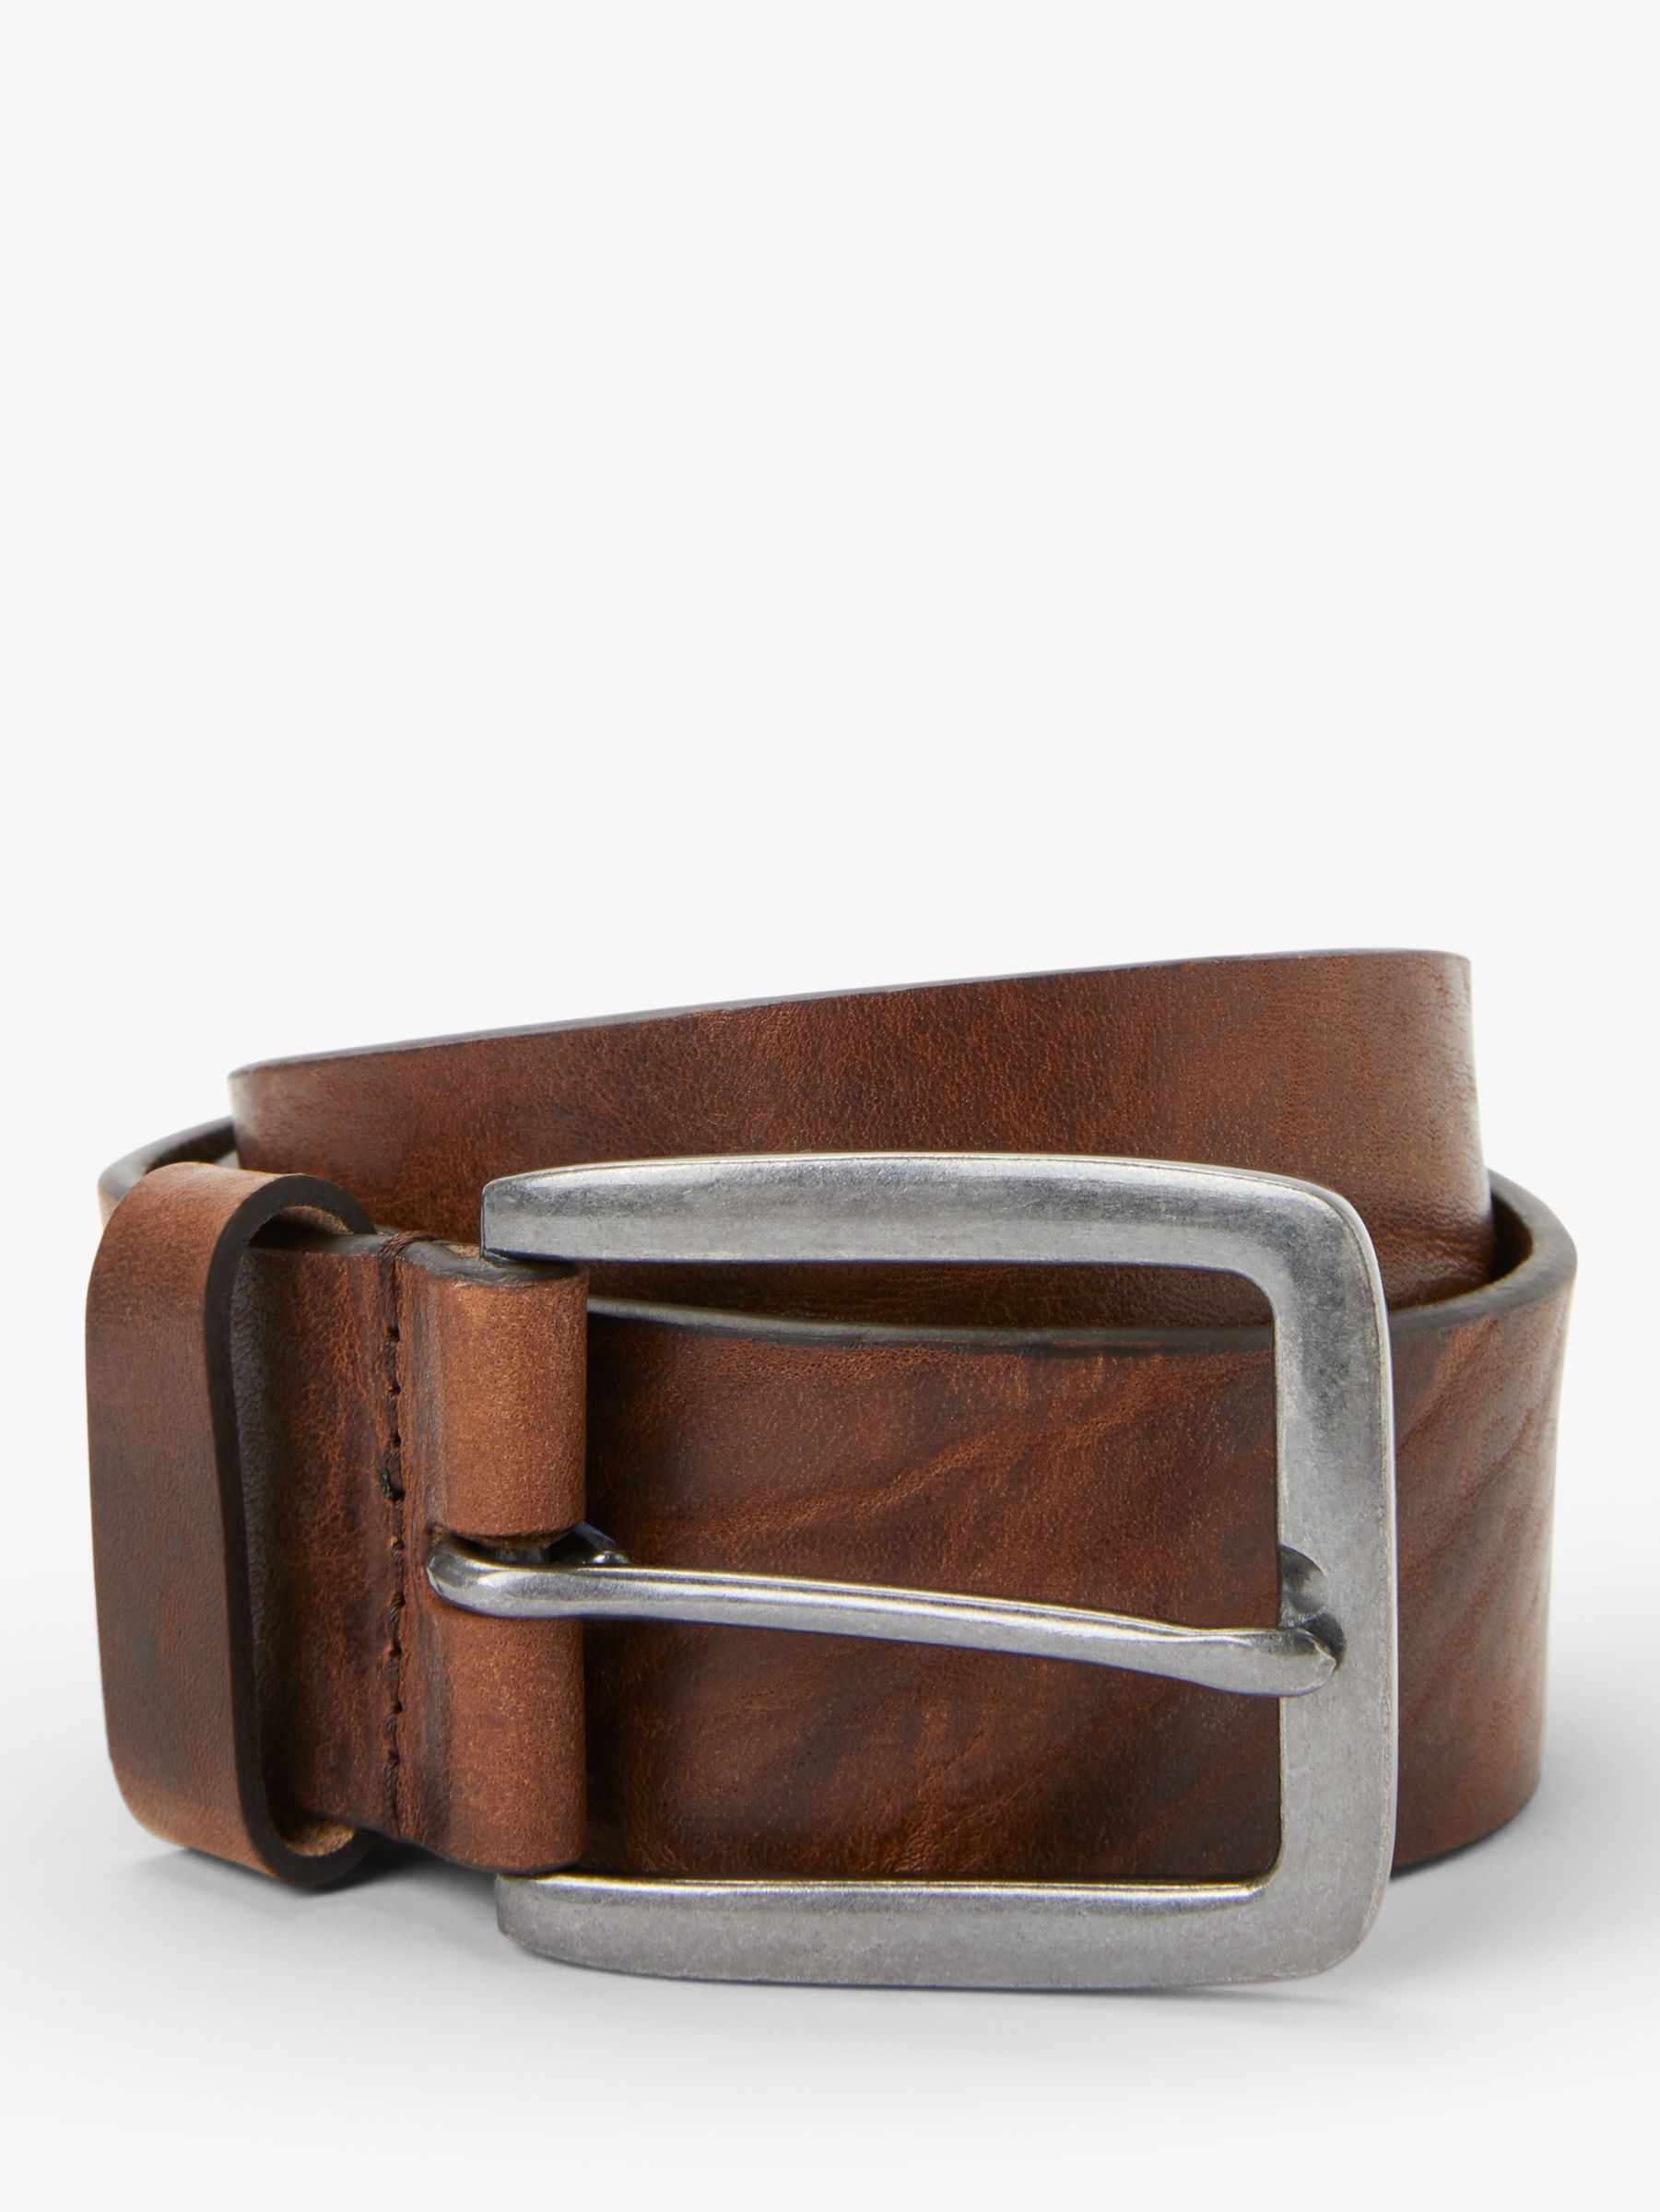 Buy John Lewis Made in Italy Leather Jeans Belt Online at johnlewis.com